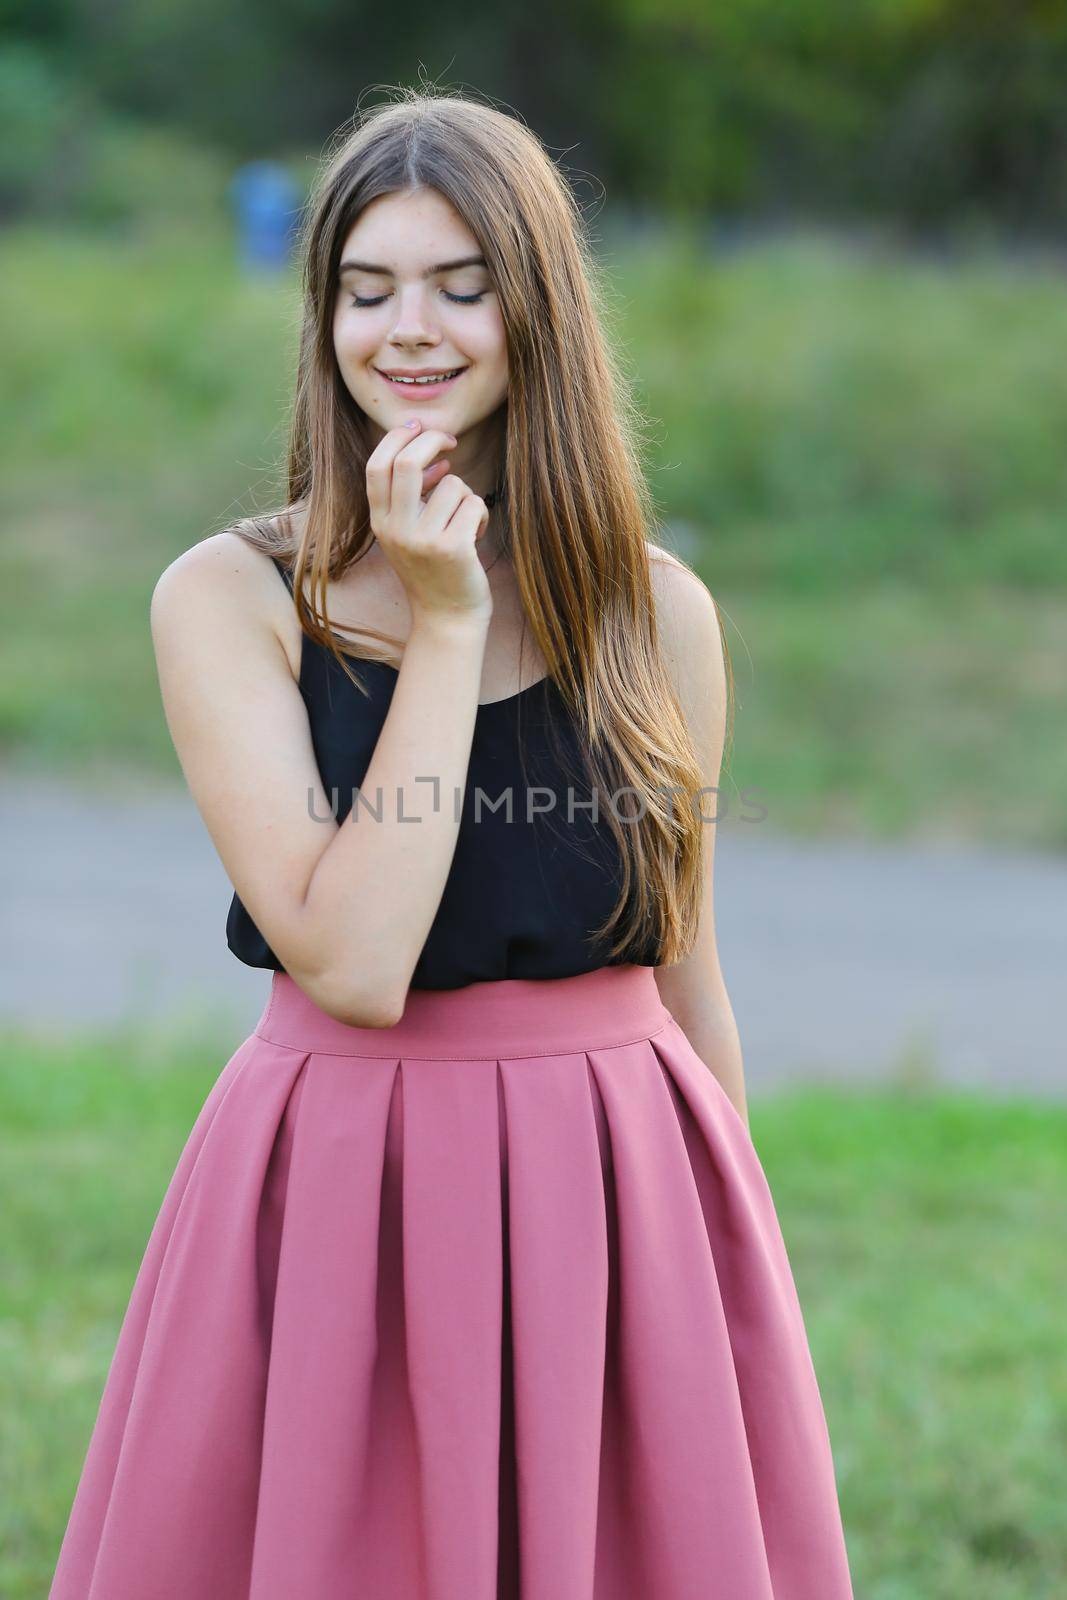 Woman with long hair and beautiful eyes on a green background shows the different human emotions. Lady portrays happy wishes